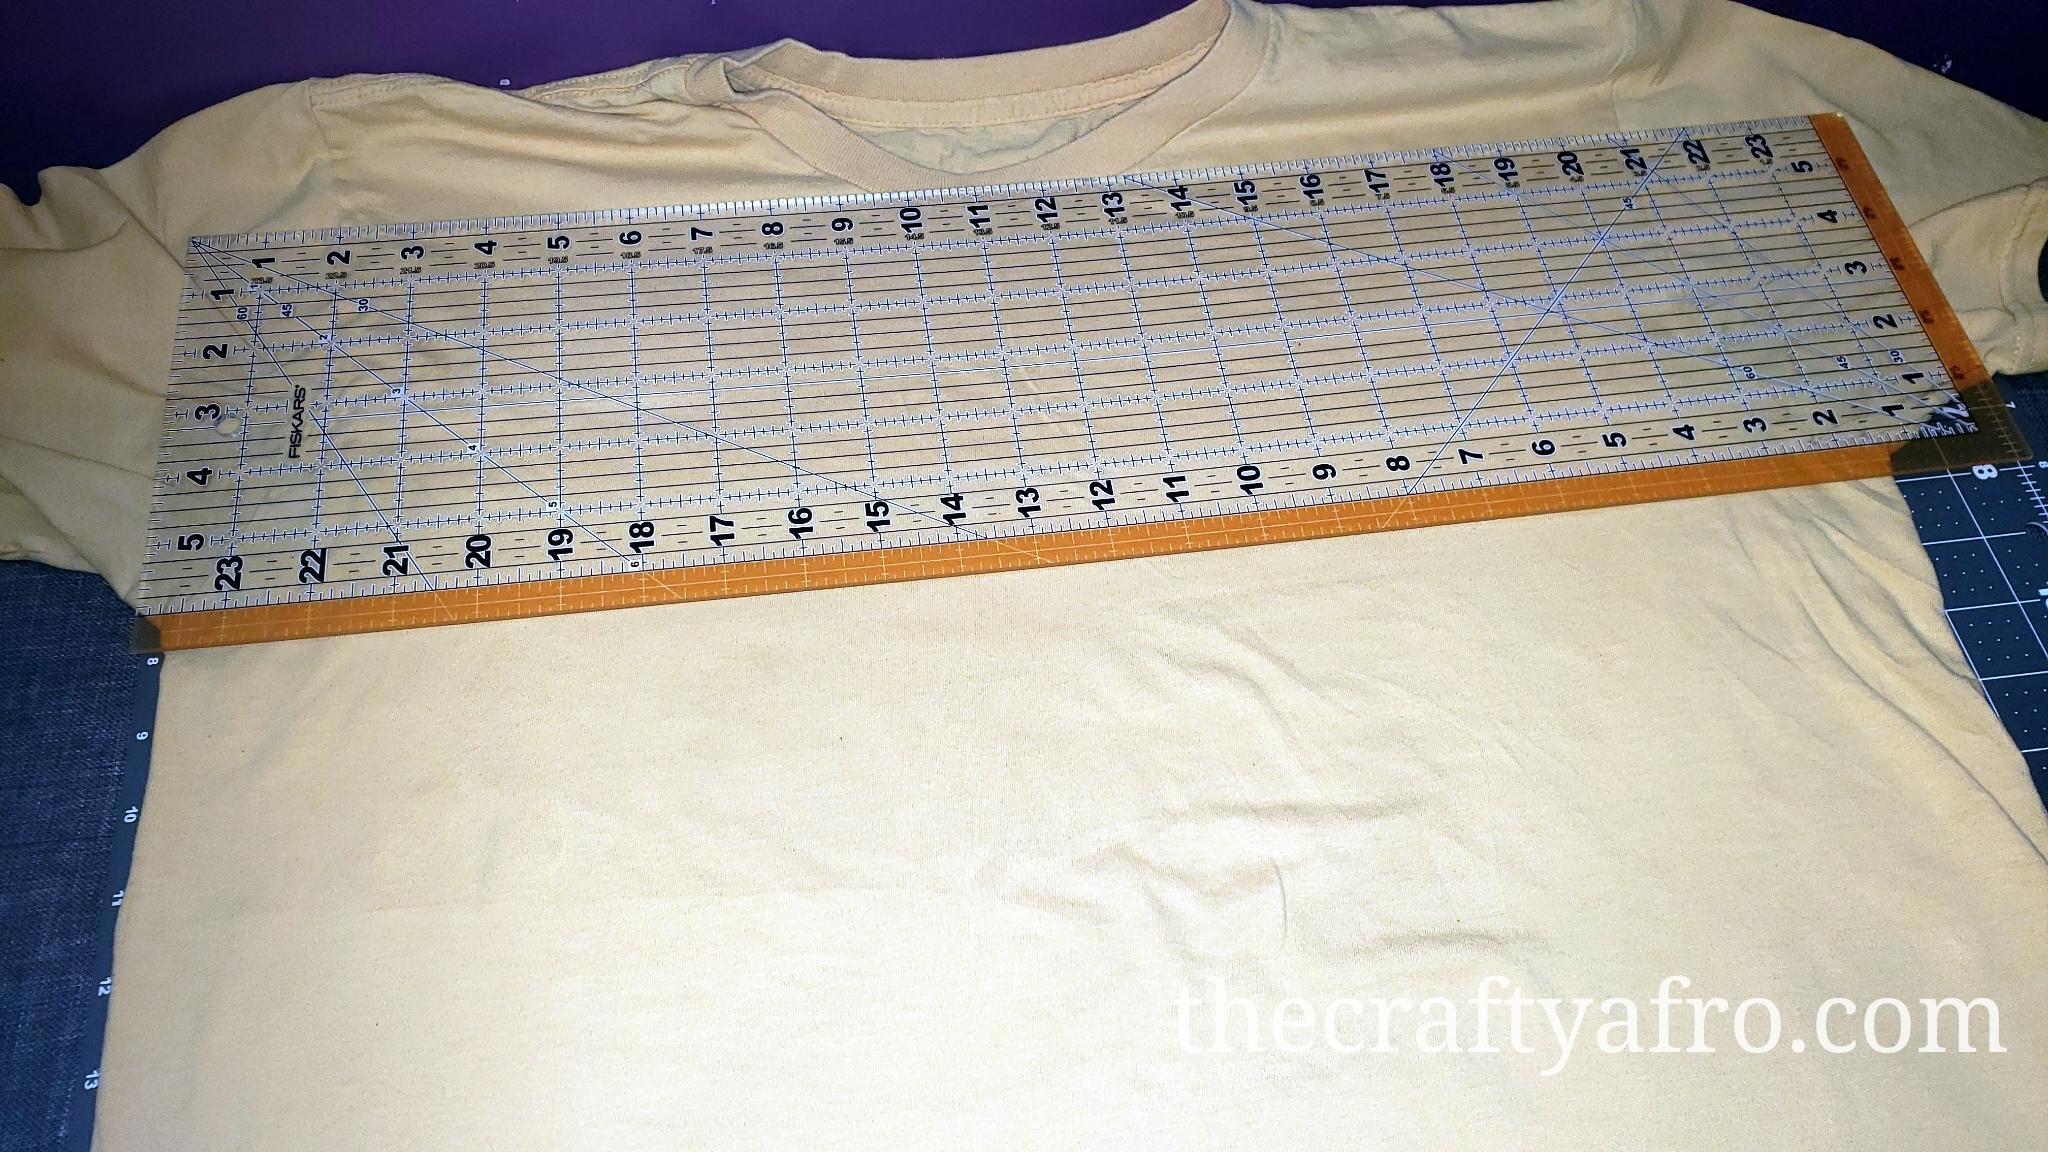 Clear ruler placed underneath the arms of a t-shirt.